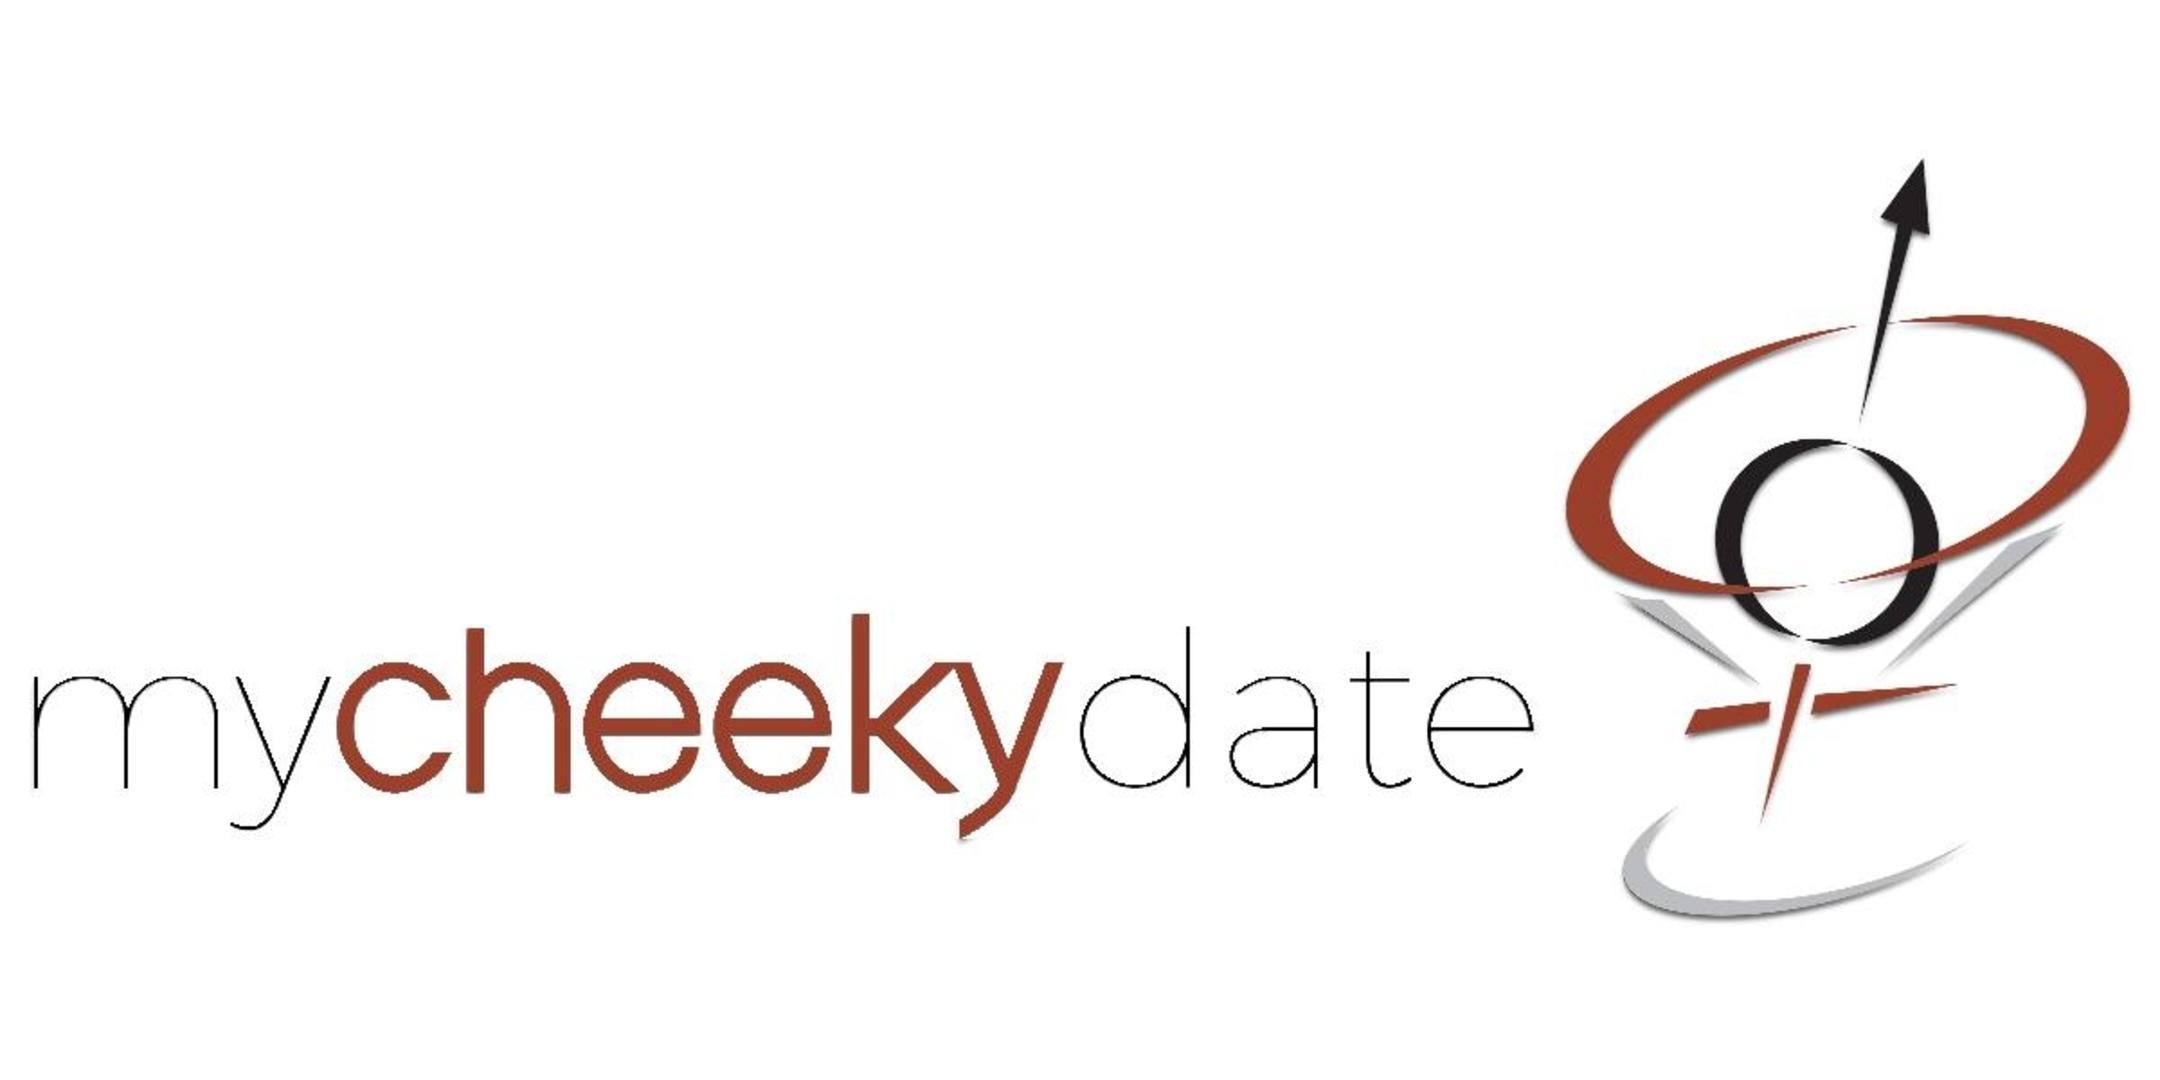 Speed Date UK Style in San Diego | Singles Events | Let's Get Cheeky!